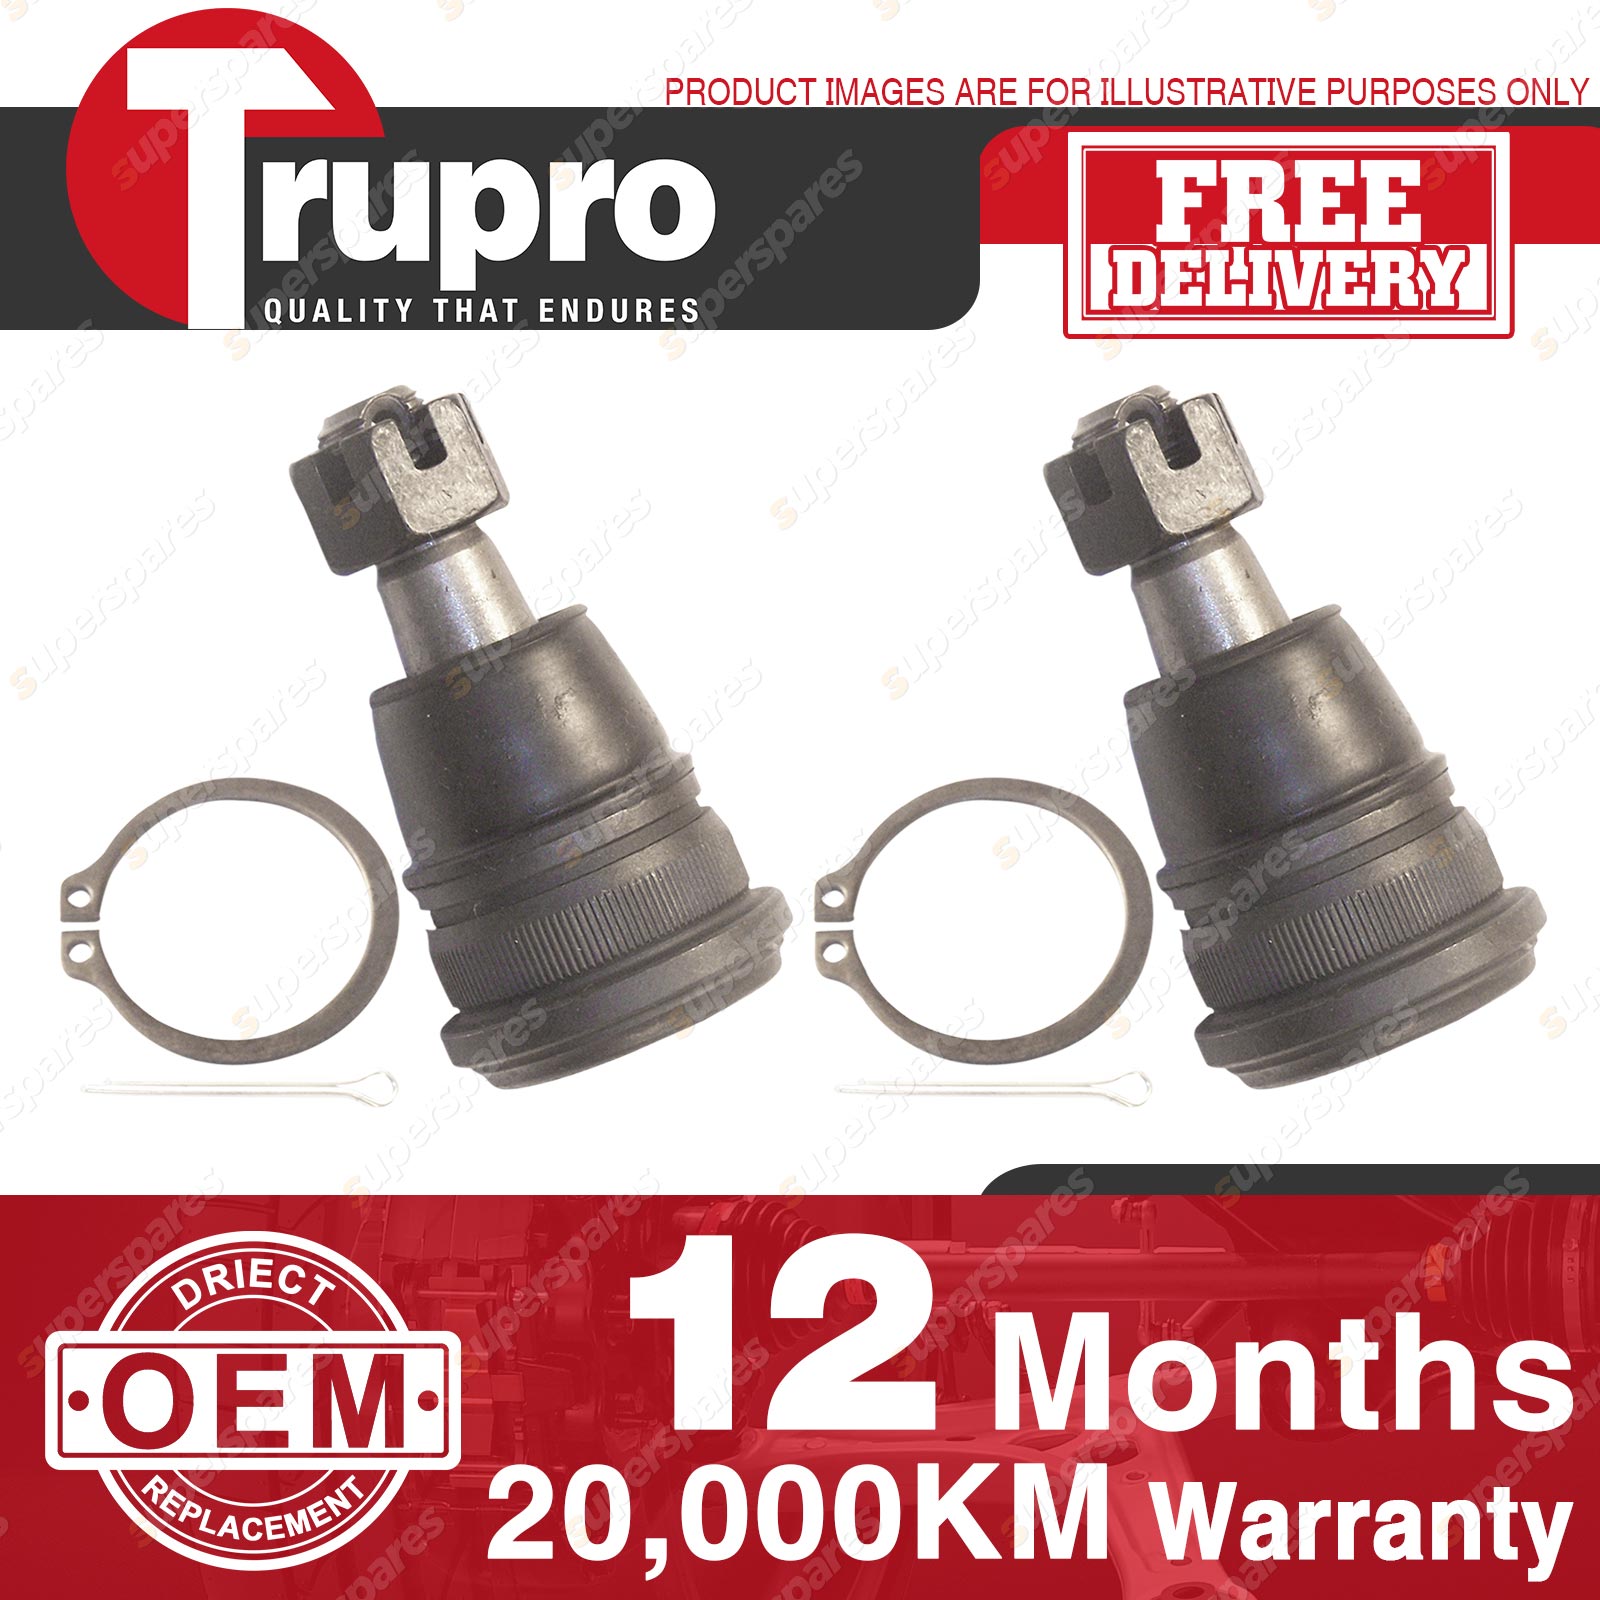 2 Pcs Premium Quality Trupro Lower Ball Joints for NISSAN